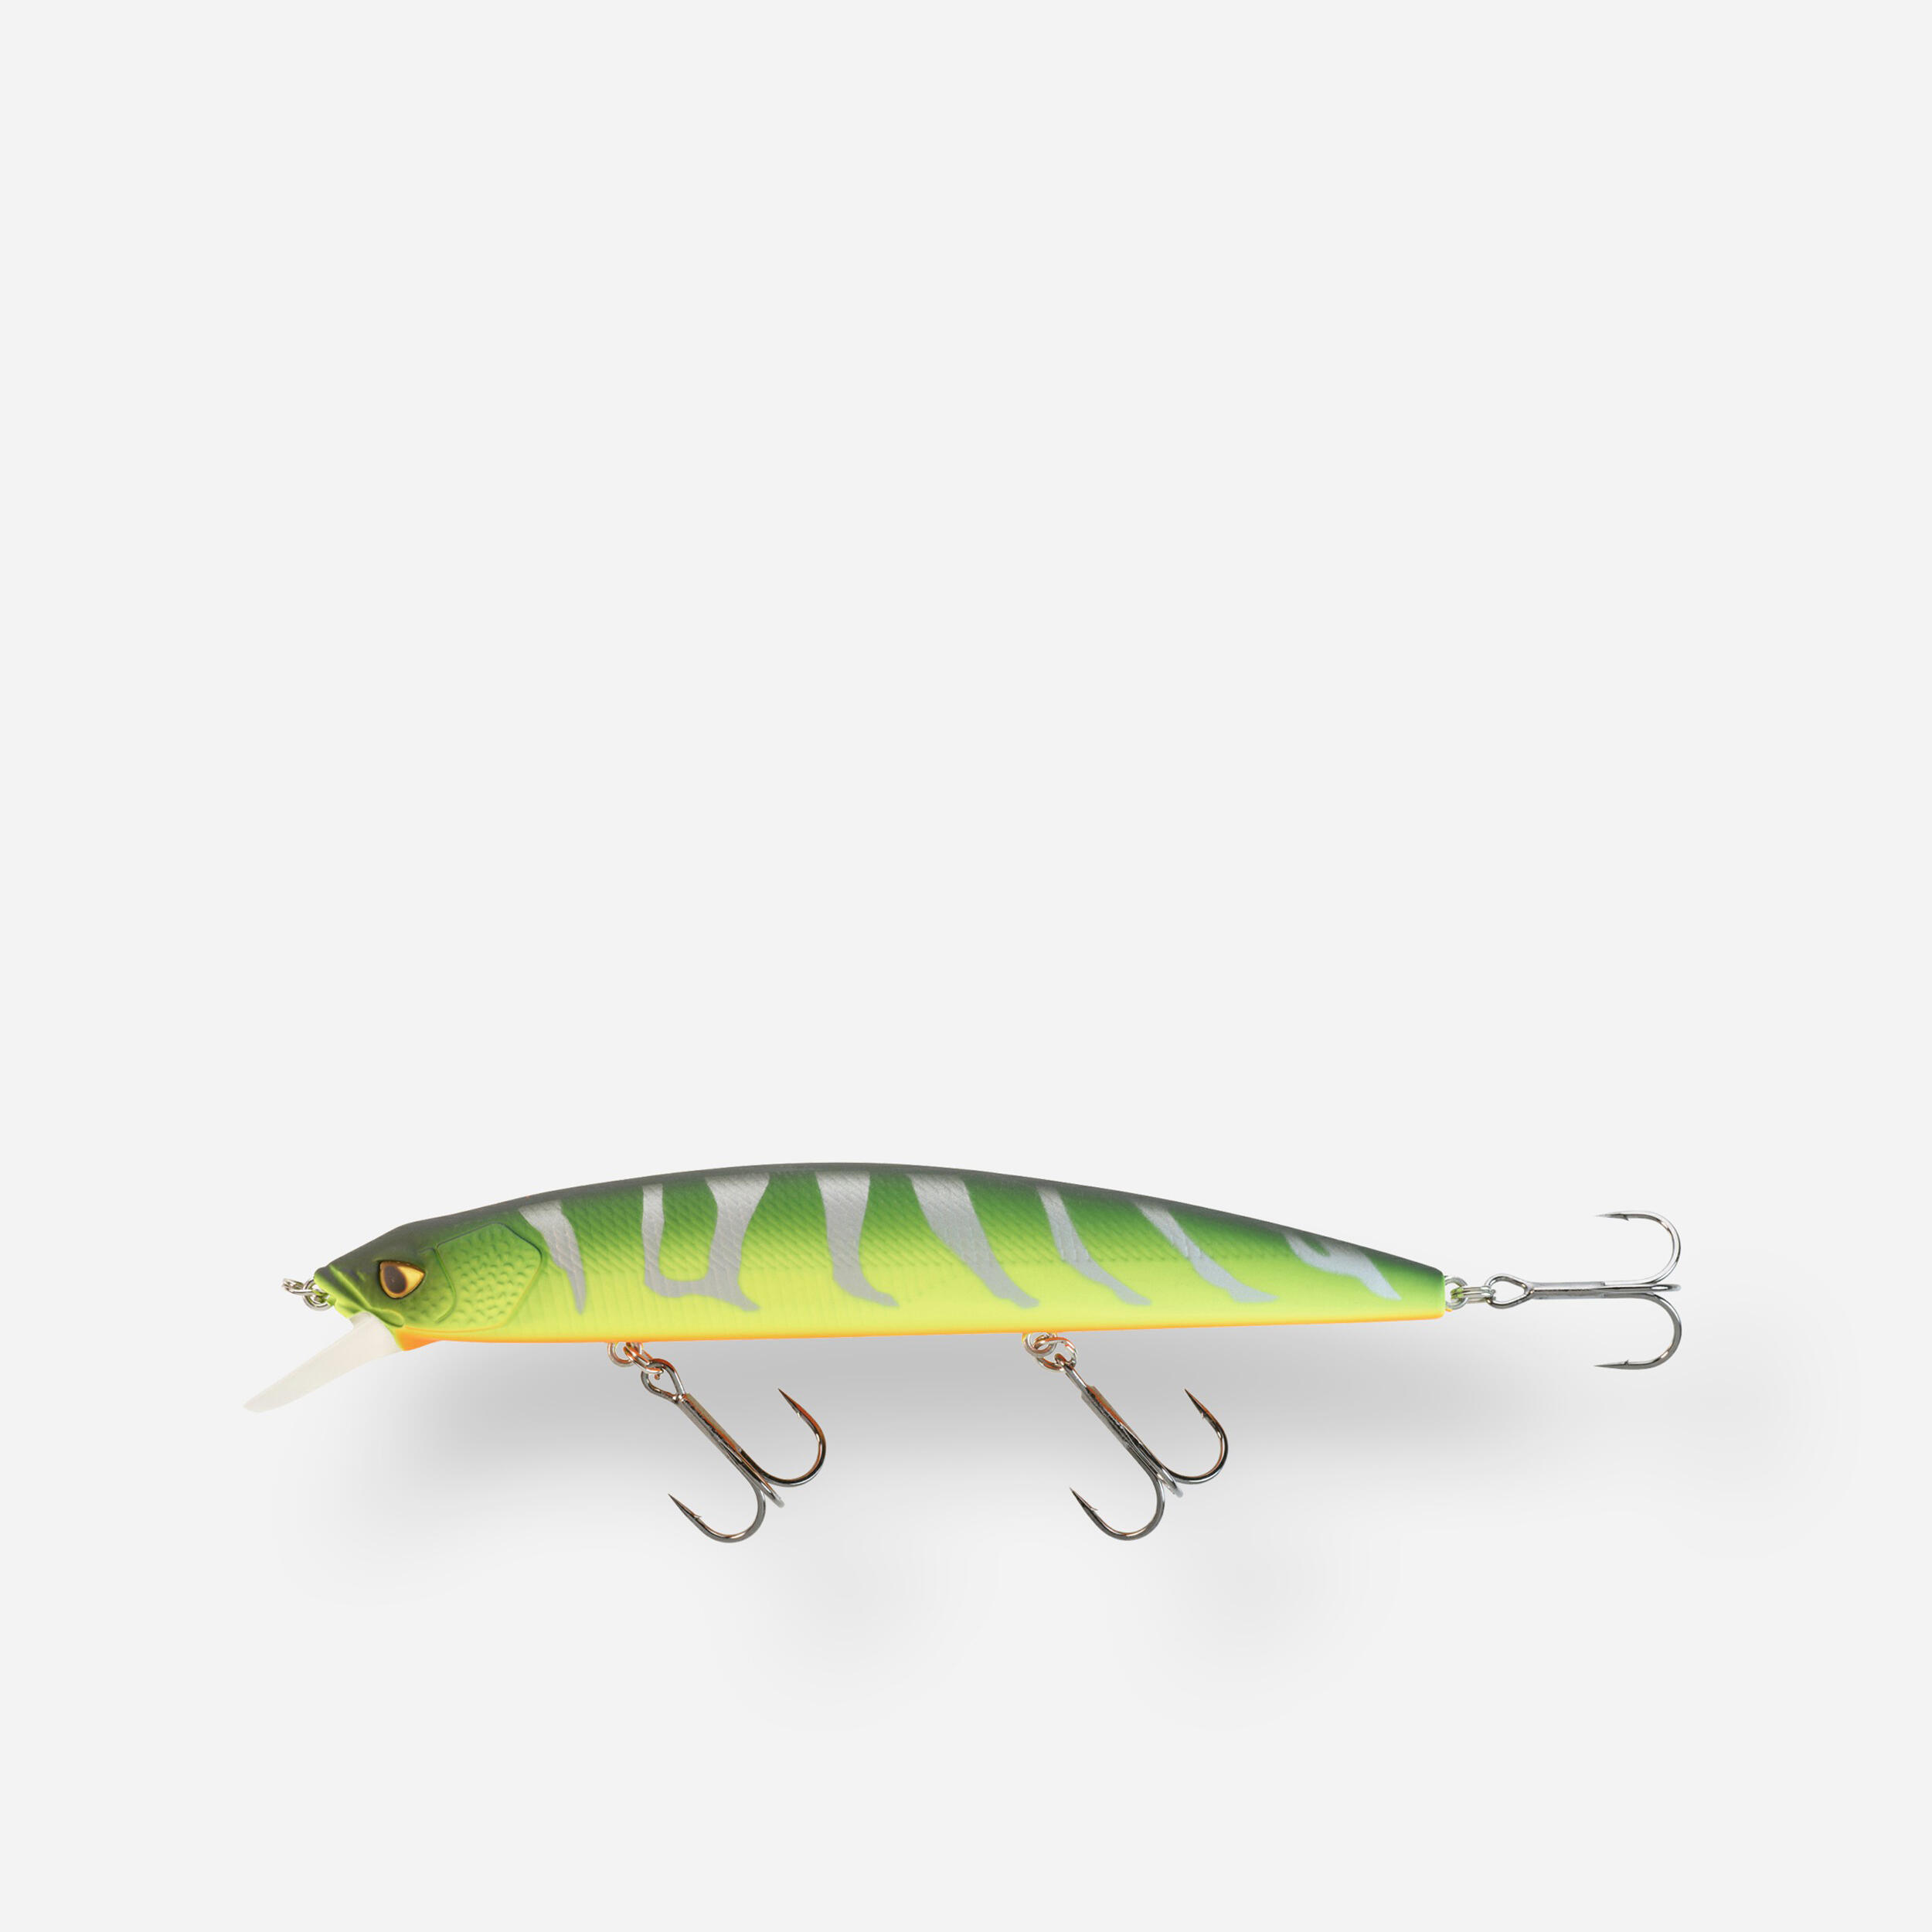 130 lure fishing soft bait kit - Fluo lime, Olive green - Caperlan